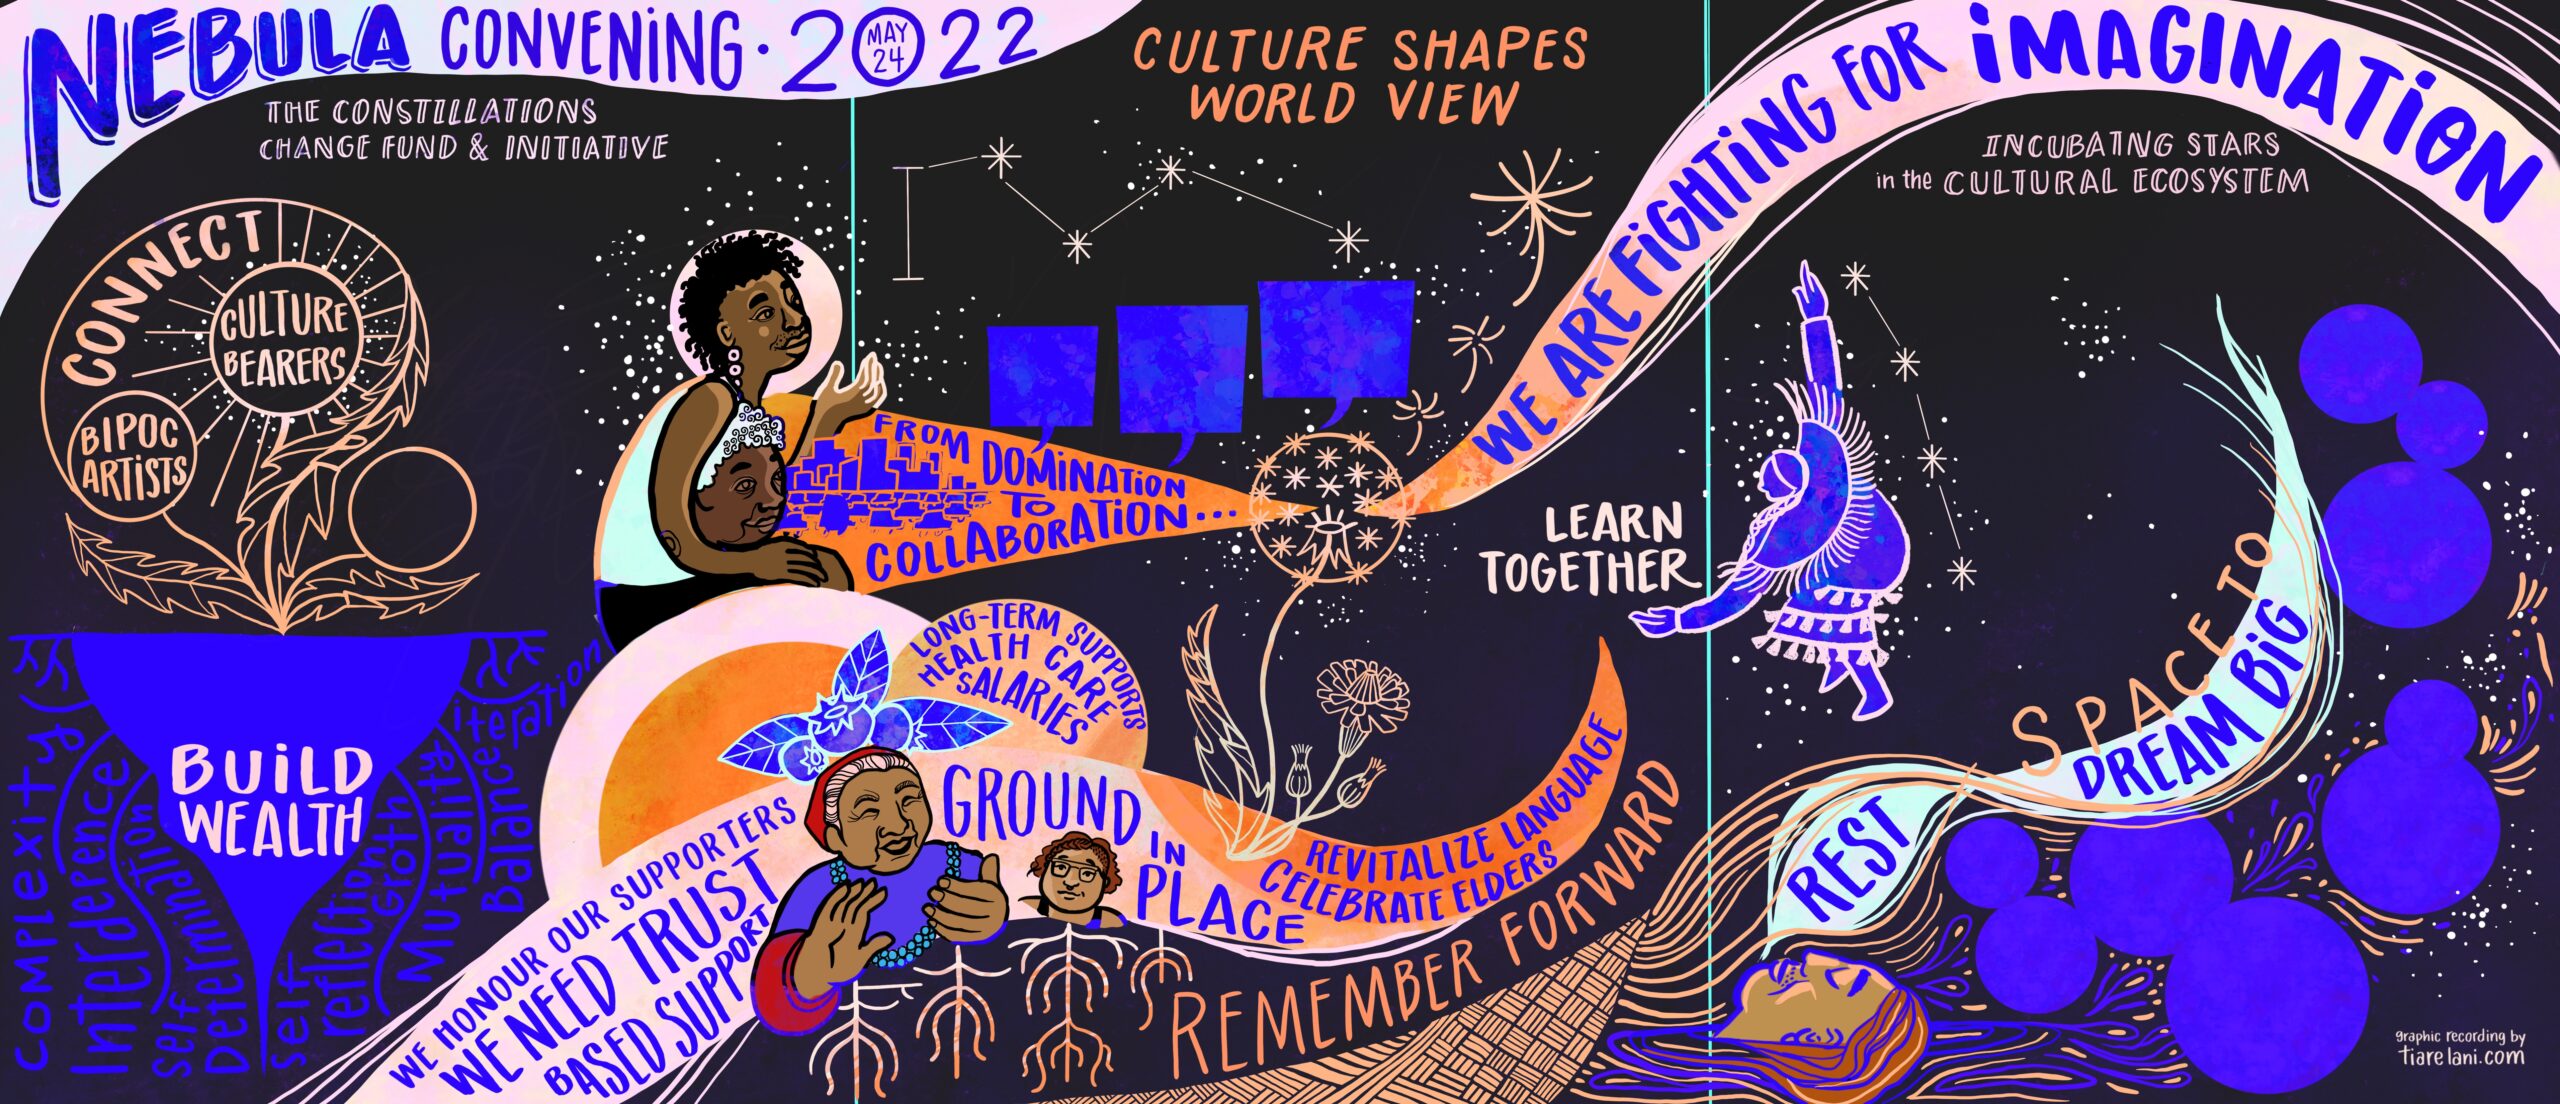 Graphic illustration from Constellations' virtual Nebula Convening in May 2022 by Tiare Lani - A dark sky with natural, fluid elements highlighting our community and goals rooted in place and remembering forward with space to dream big. Our purpose of fighting for imagination lights up the night sky.